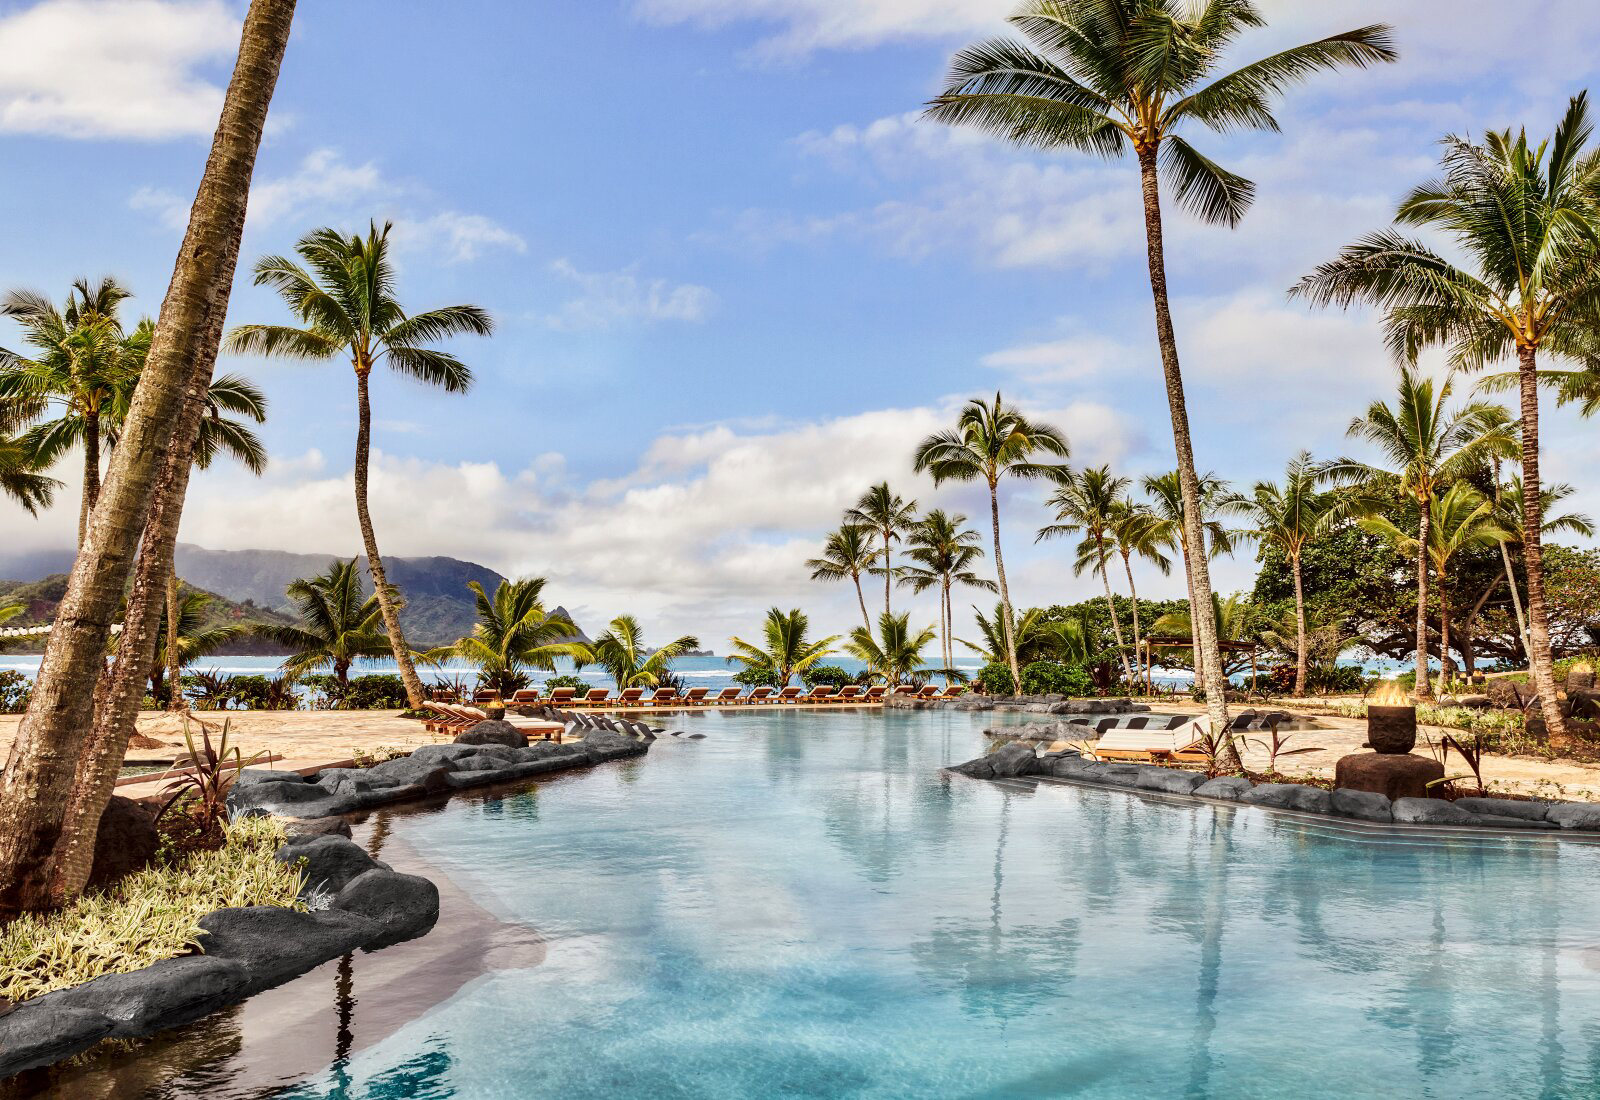 All-Inclusive Resorts in Hawaii: 7 Hotels With Awesome Amenities